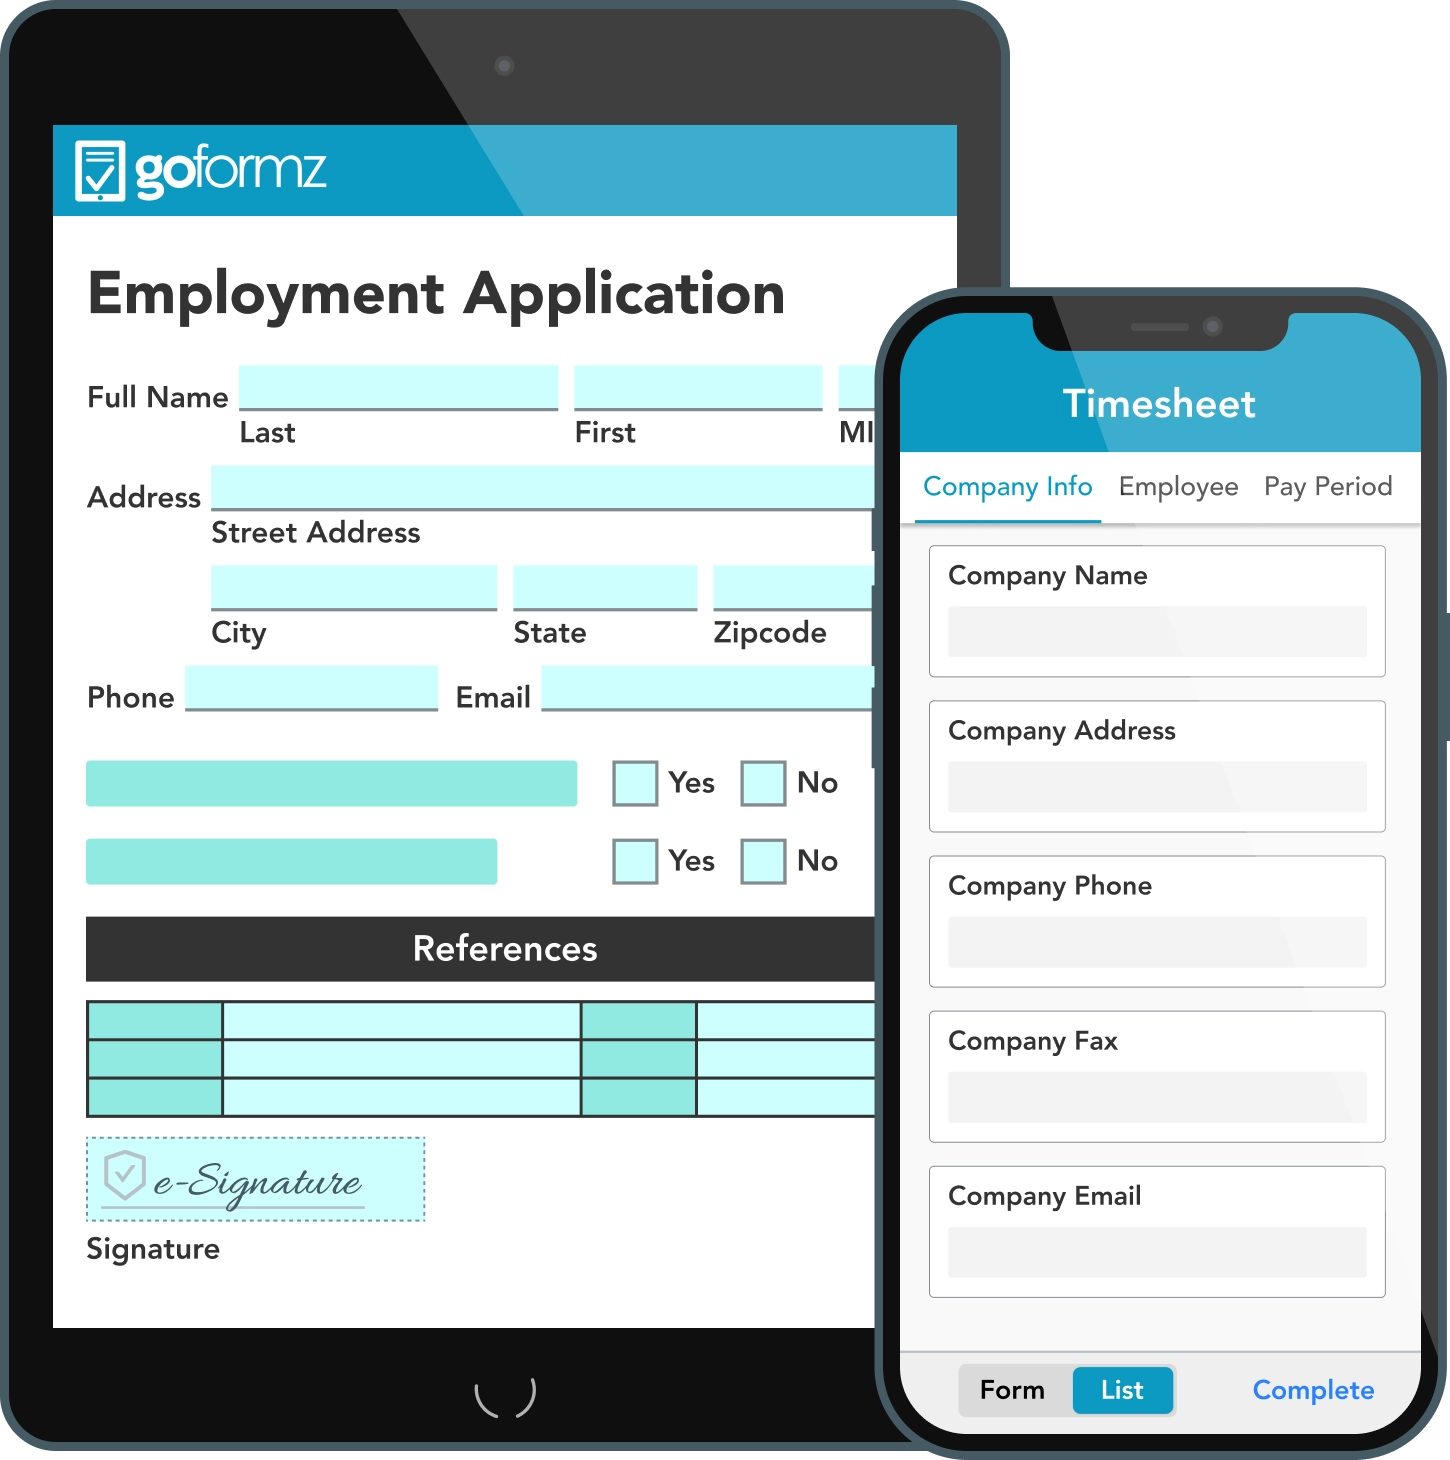 Access your forms online and through mobile apps with GoFormz.